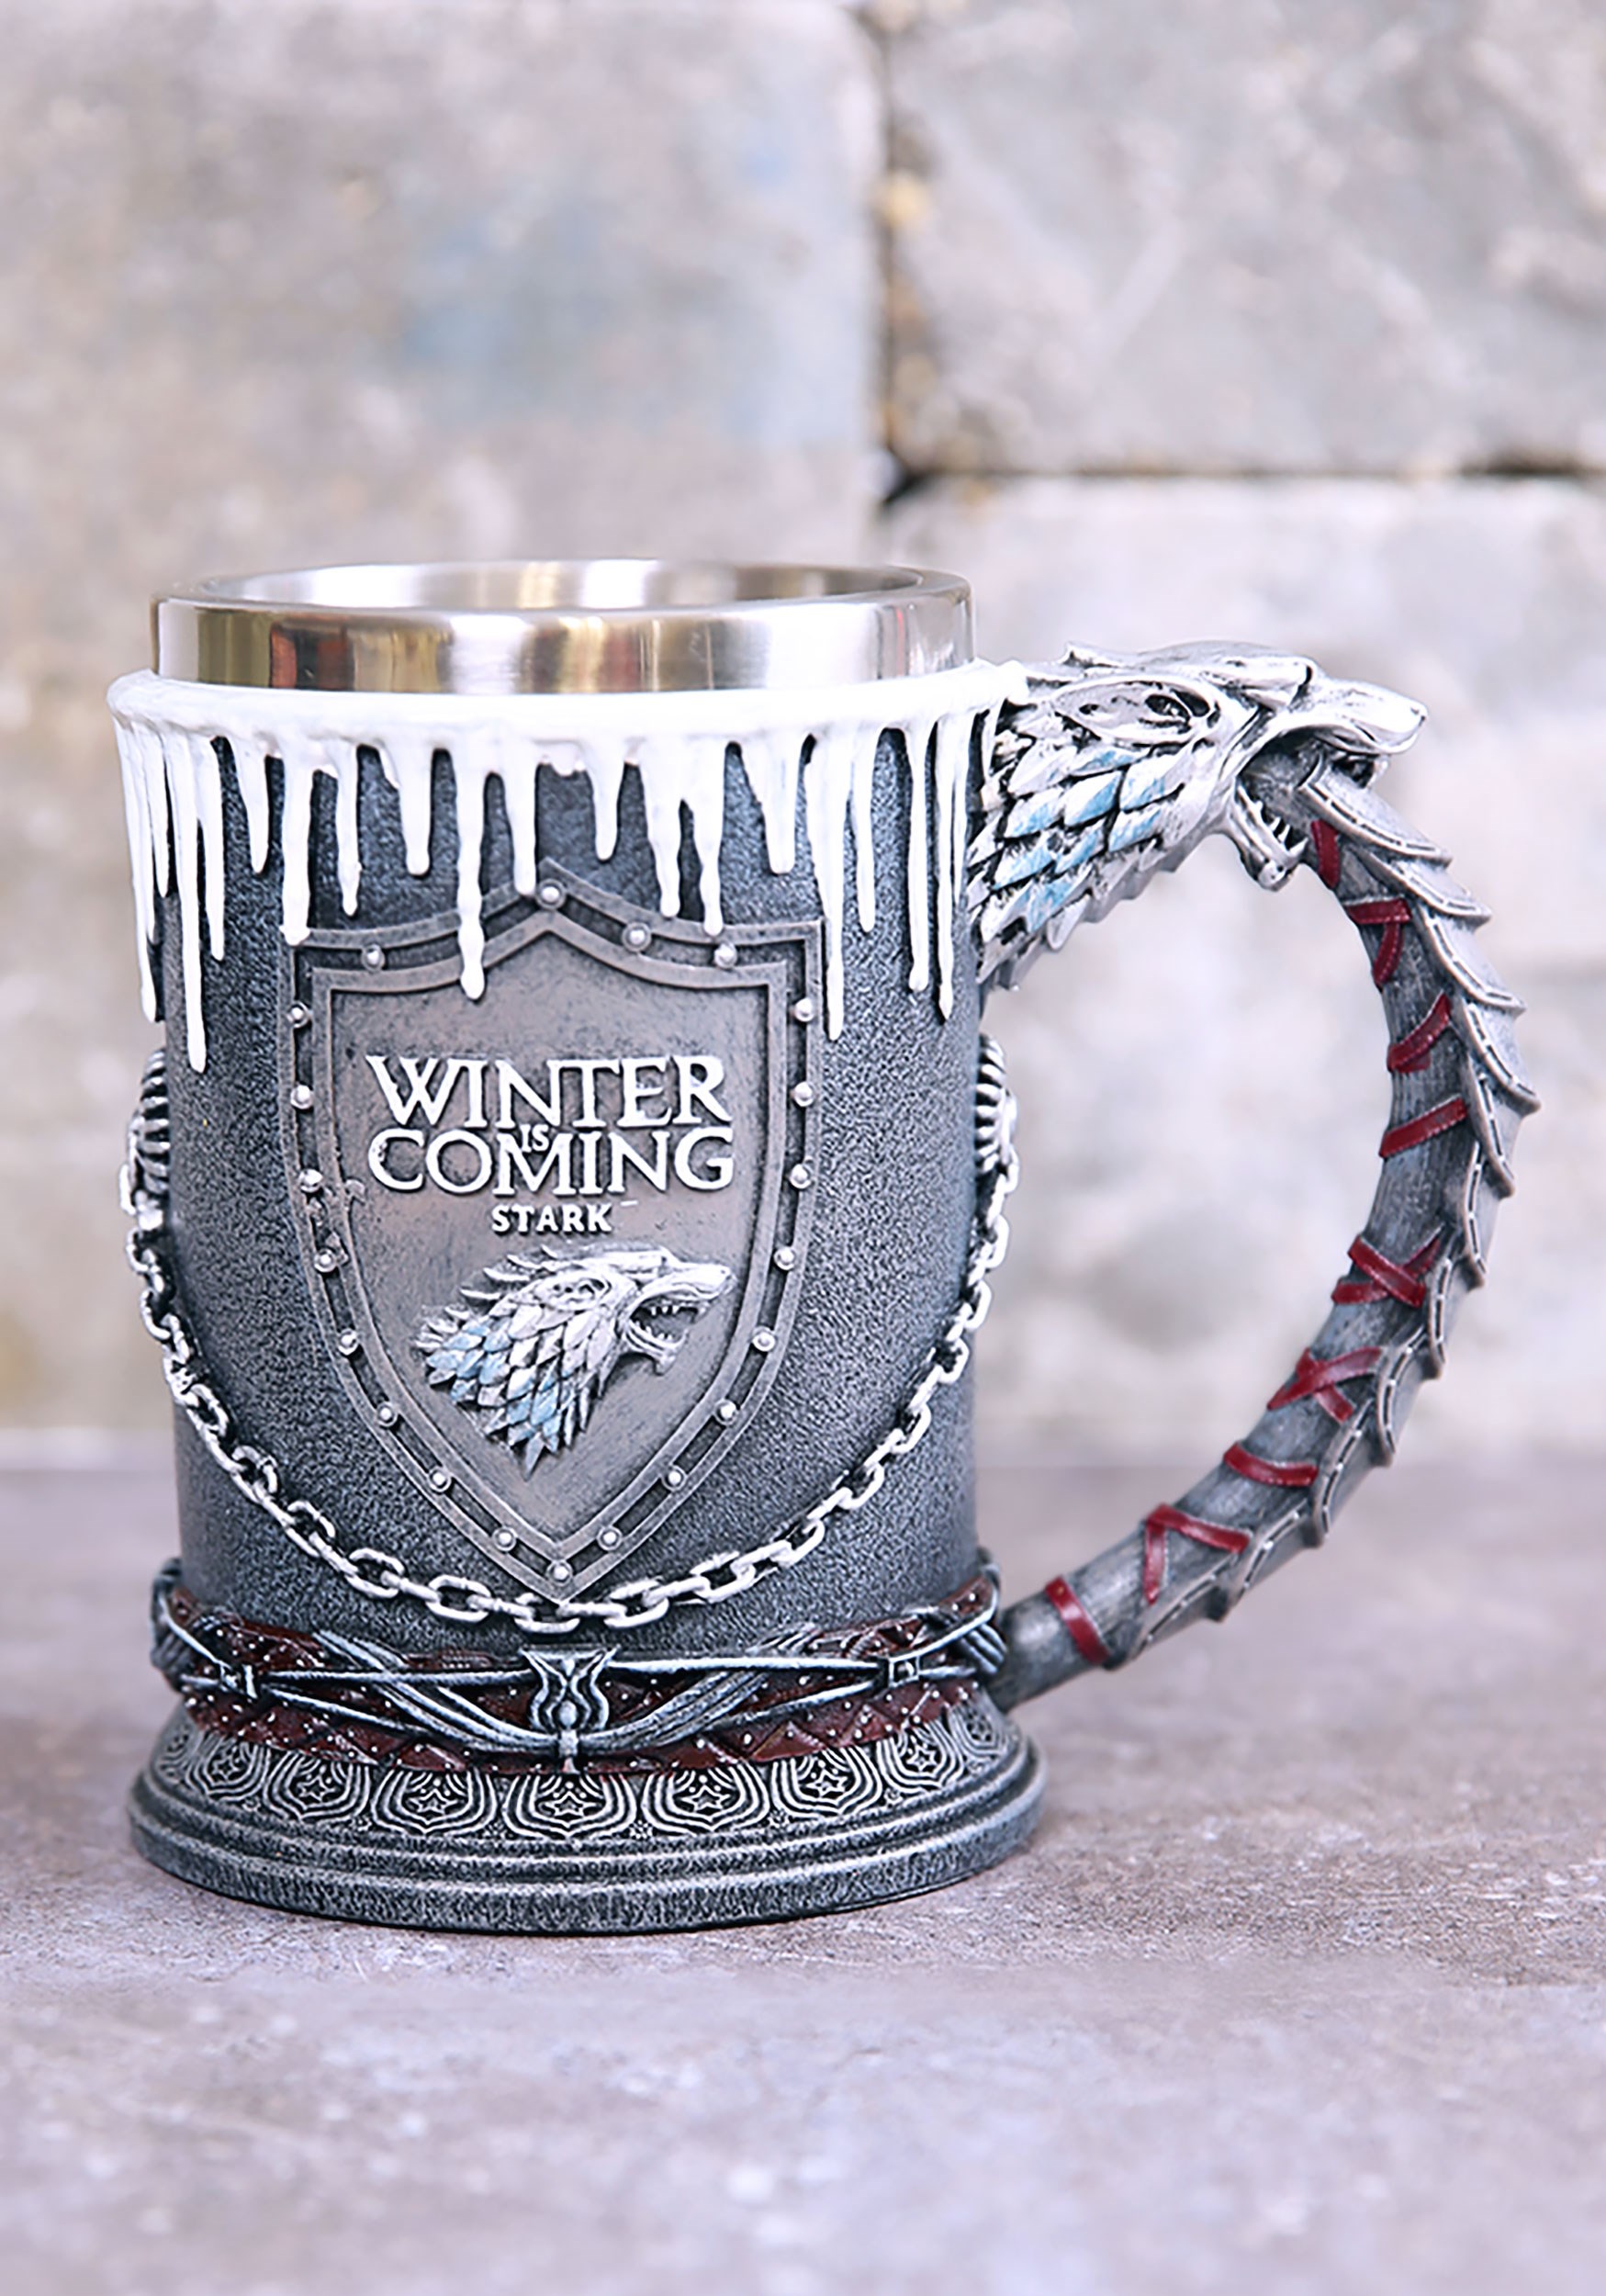 Winter Is Coming Game of Thrones Goblet Collectable Drinking Glass Vessel Gift